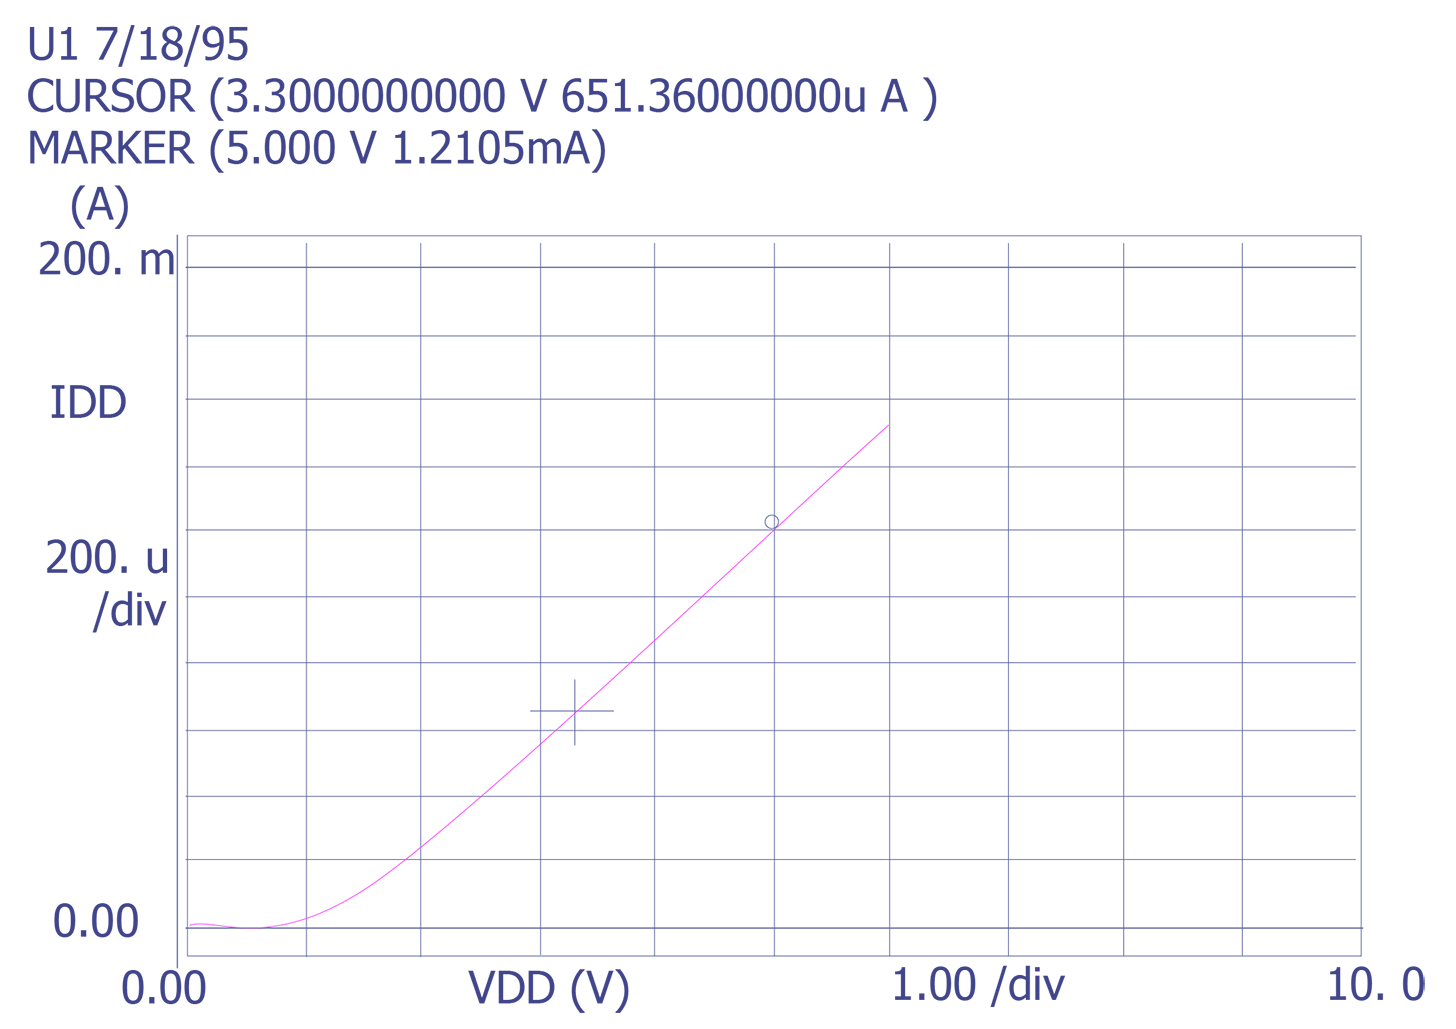 Plot of an IC in a high current state.